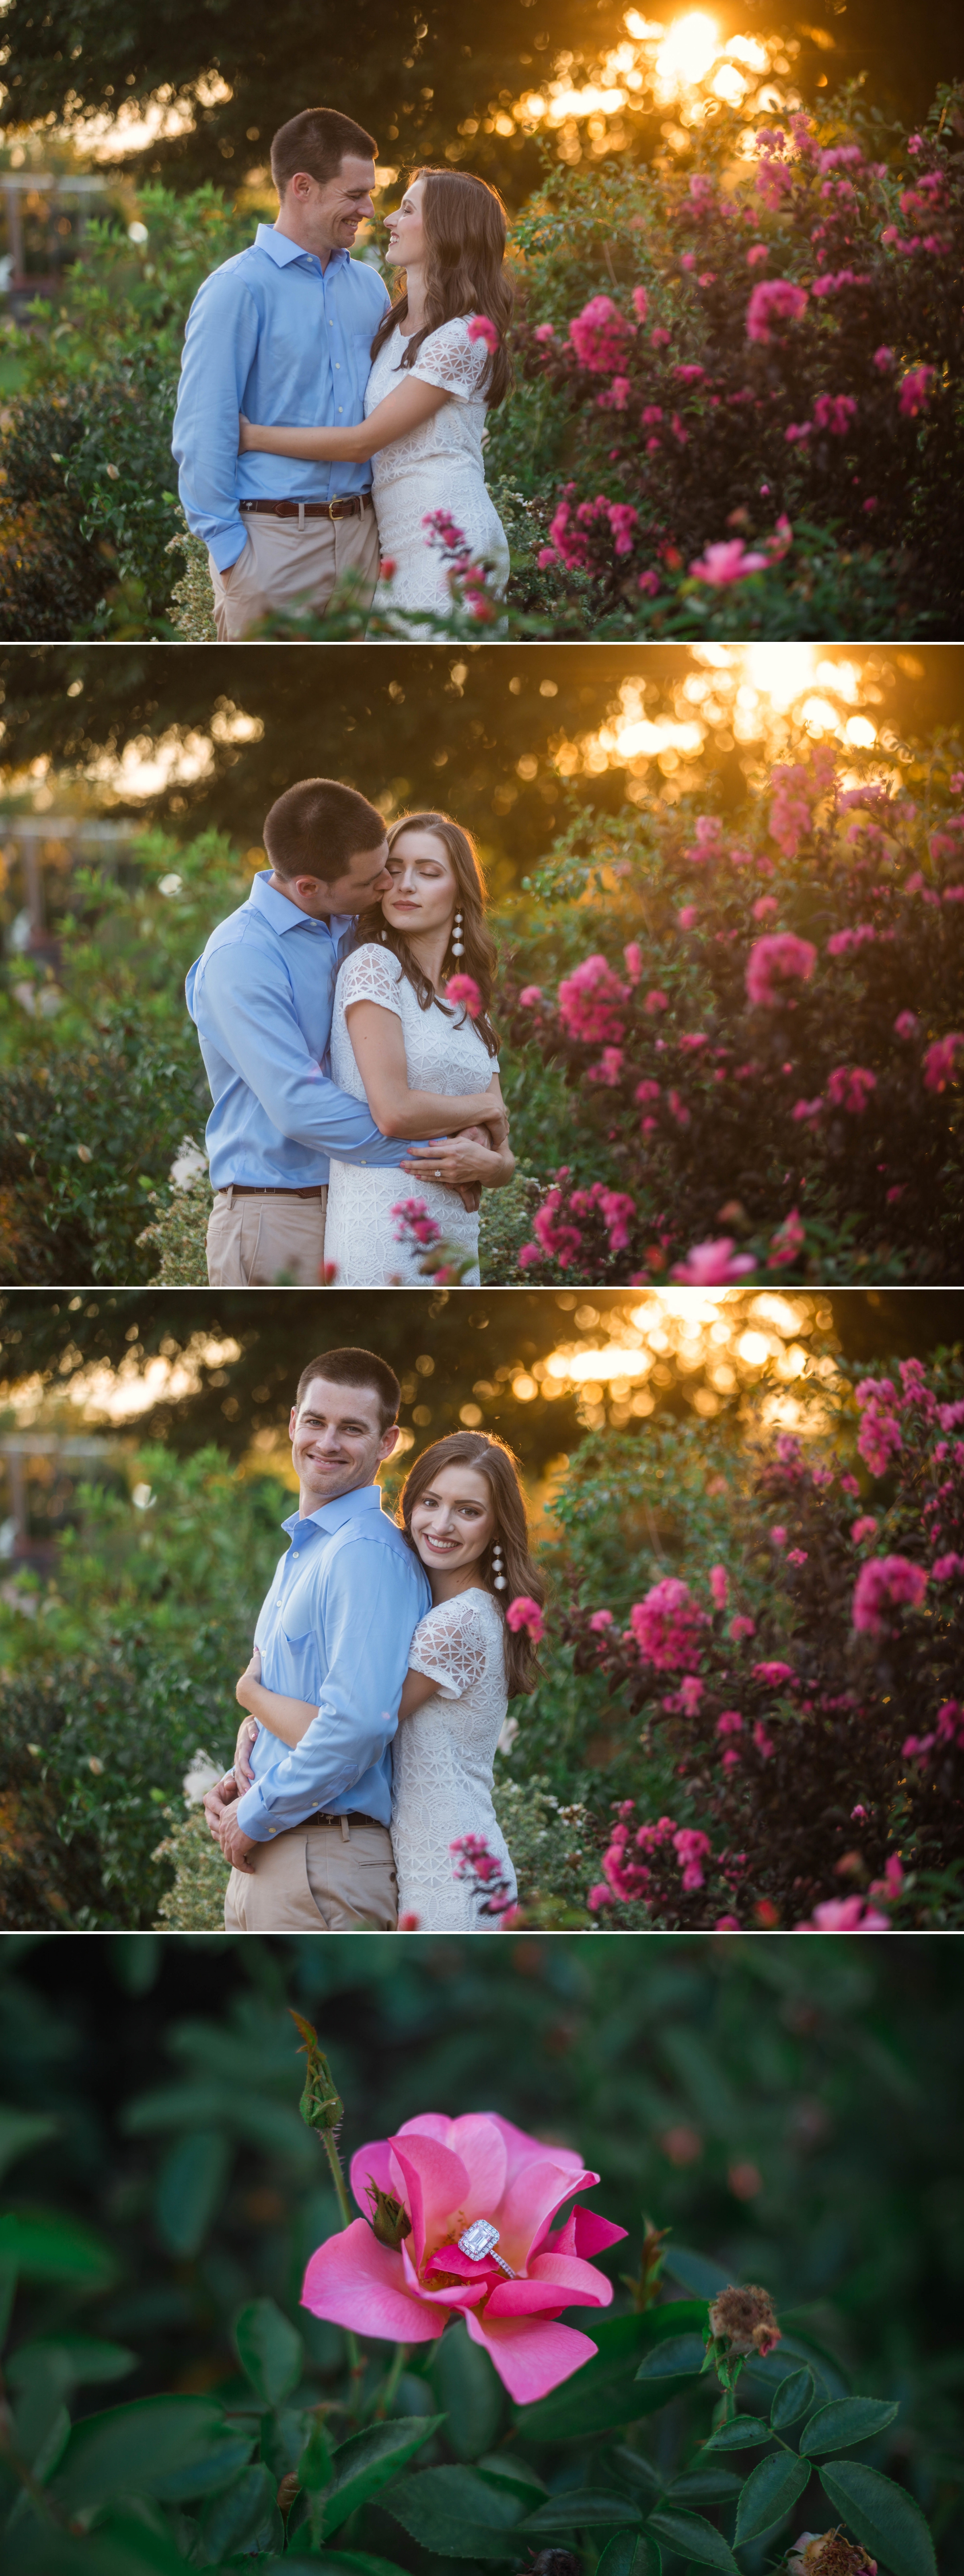 Paige + Tyler - Engagement Photography Session at the JC Raulston Arboretum - Raleigh Wedding Photographer 8.jpg